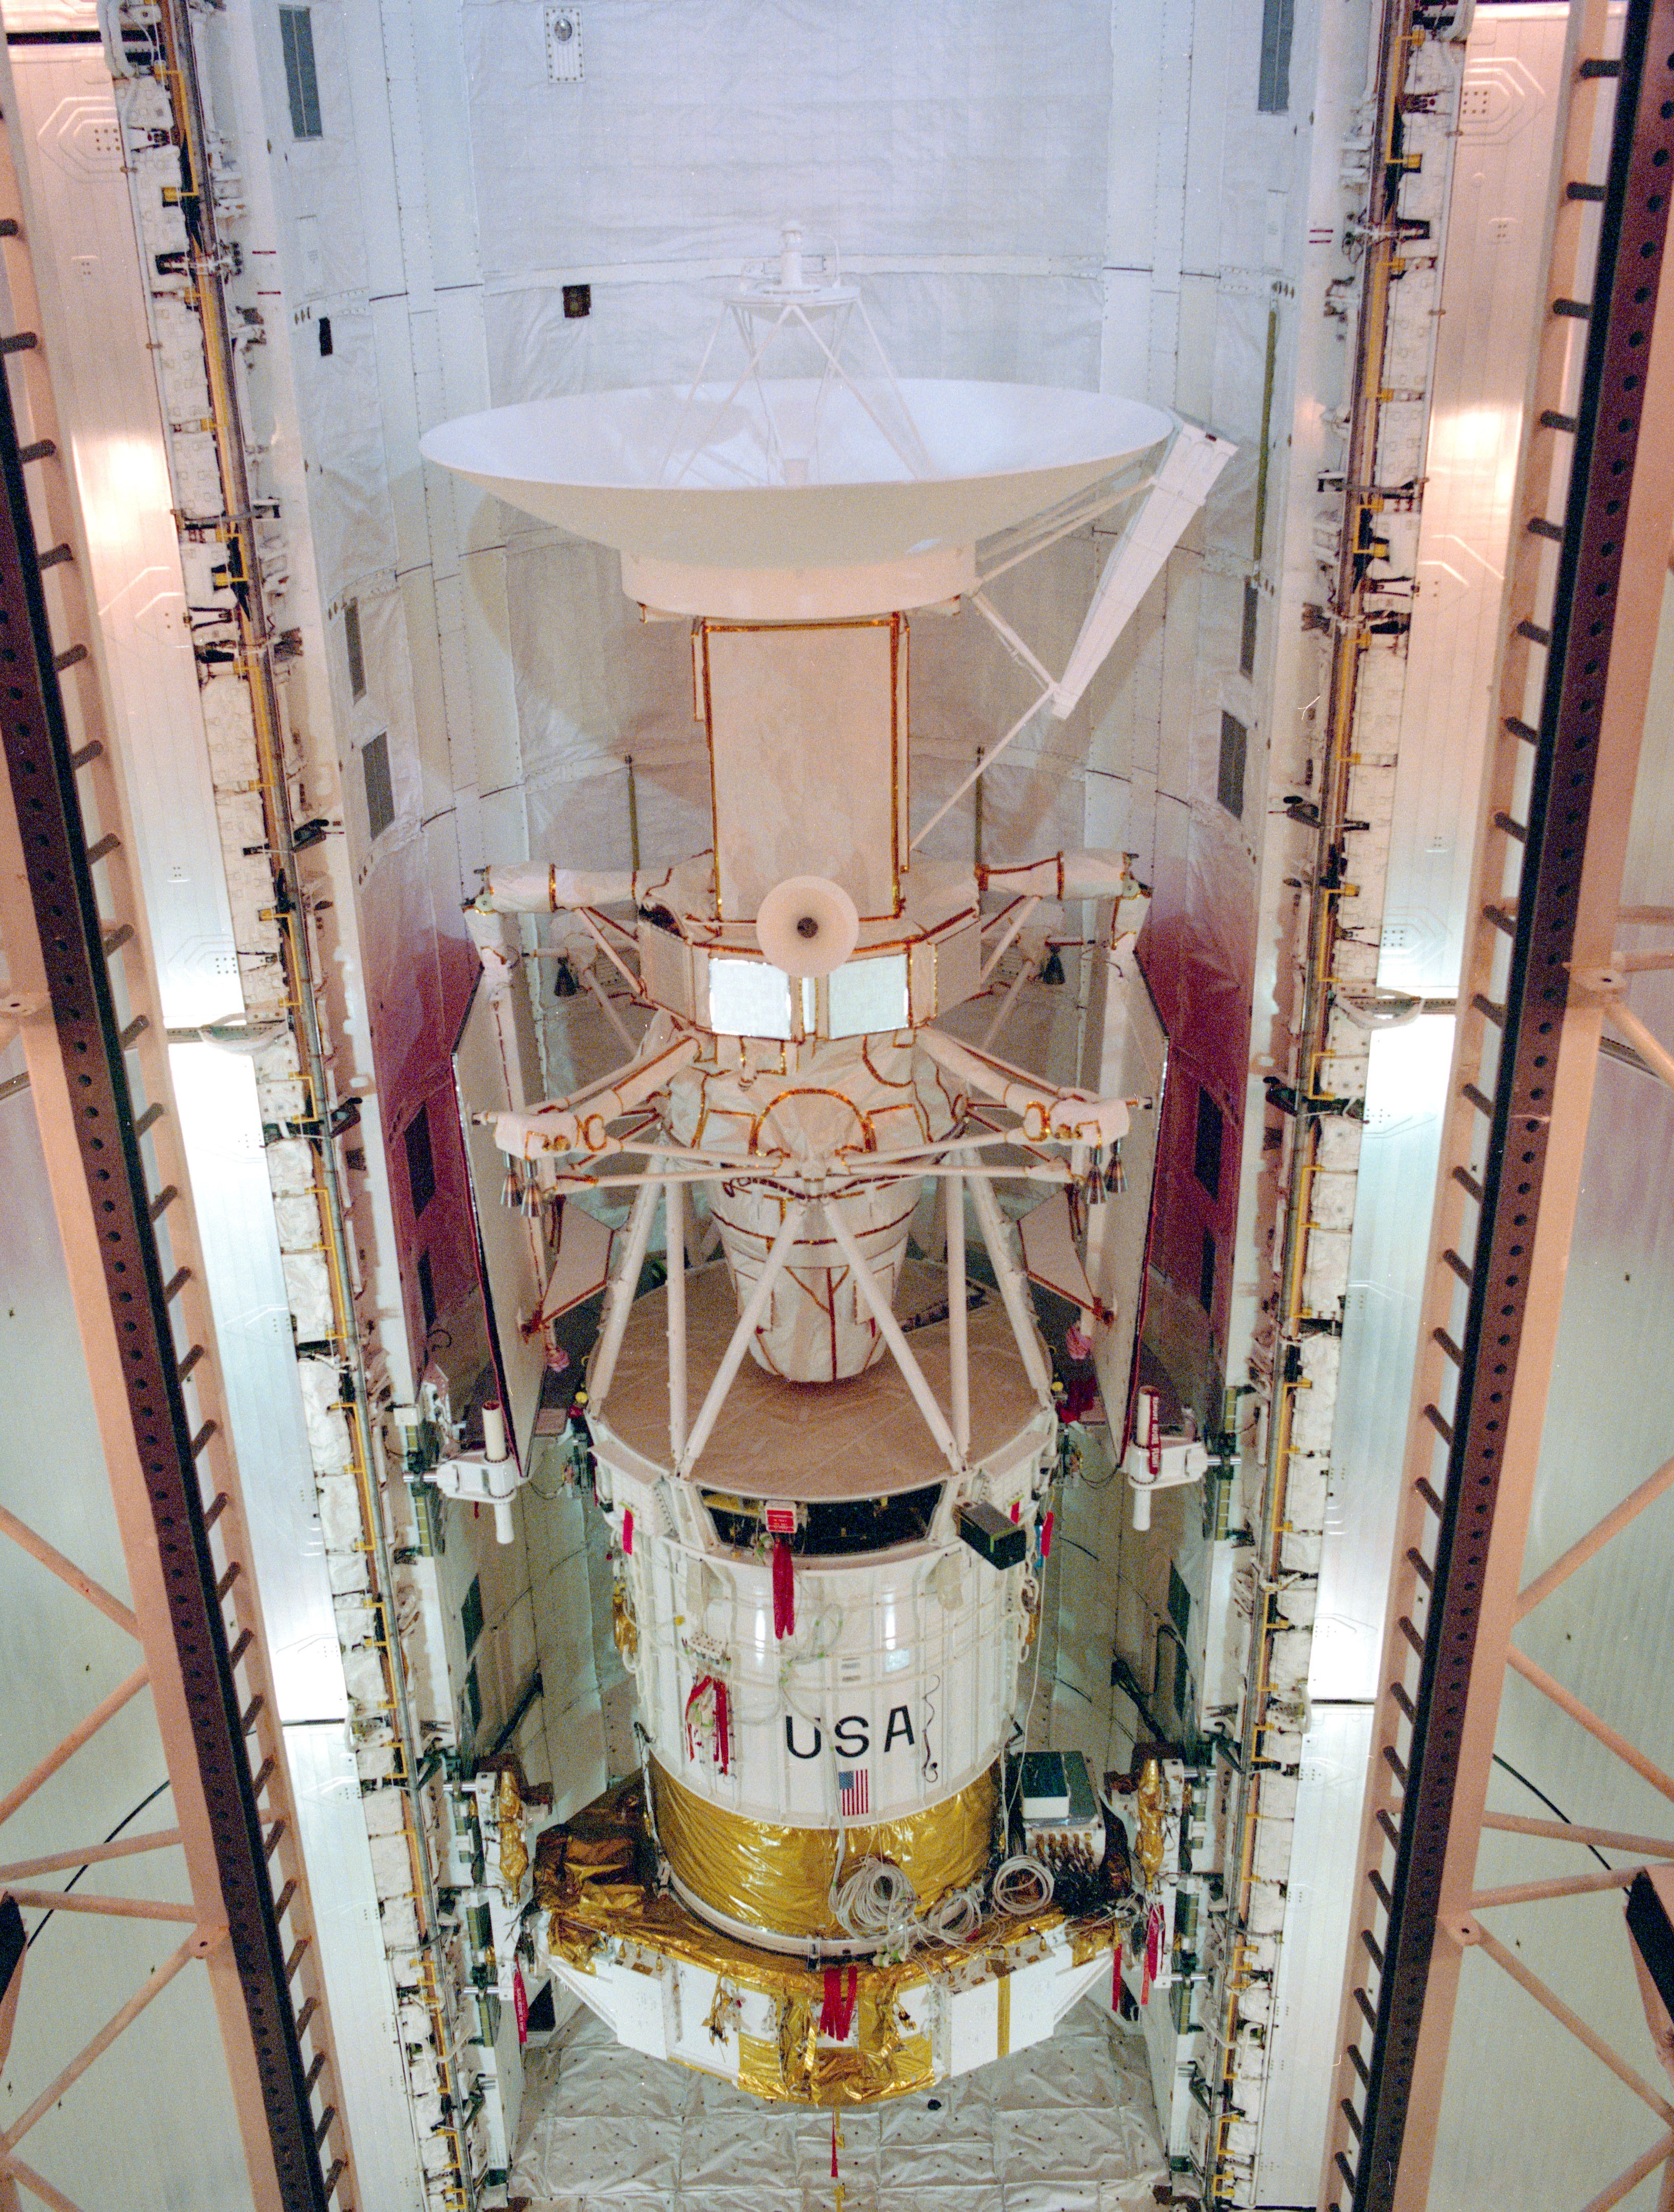 The Magellan spacecraft in Atlantis' payload bay in preparation for STS-30